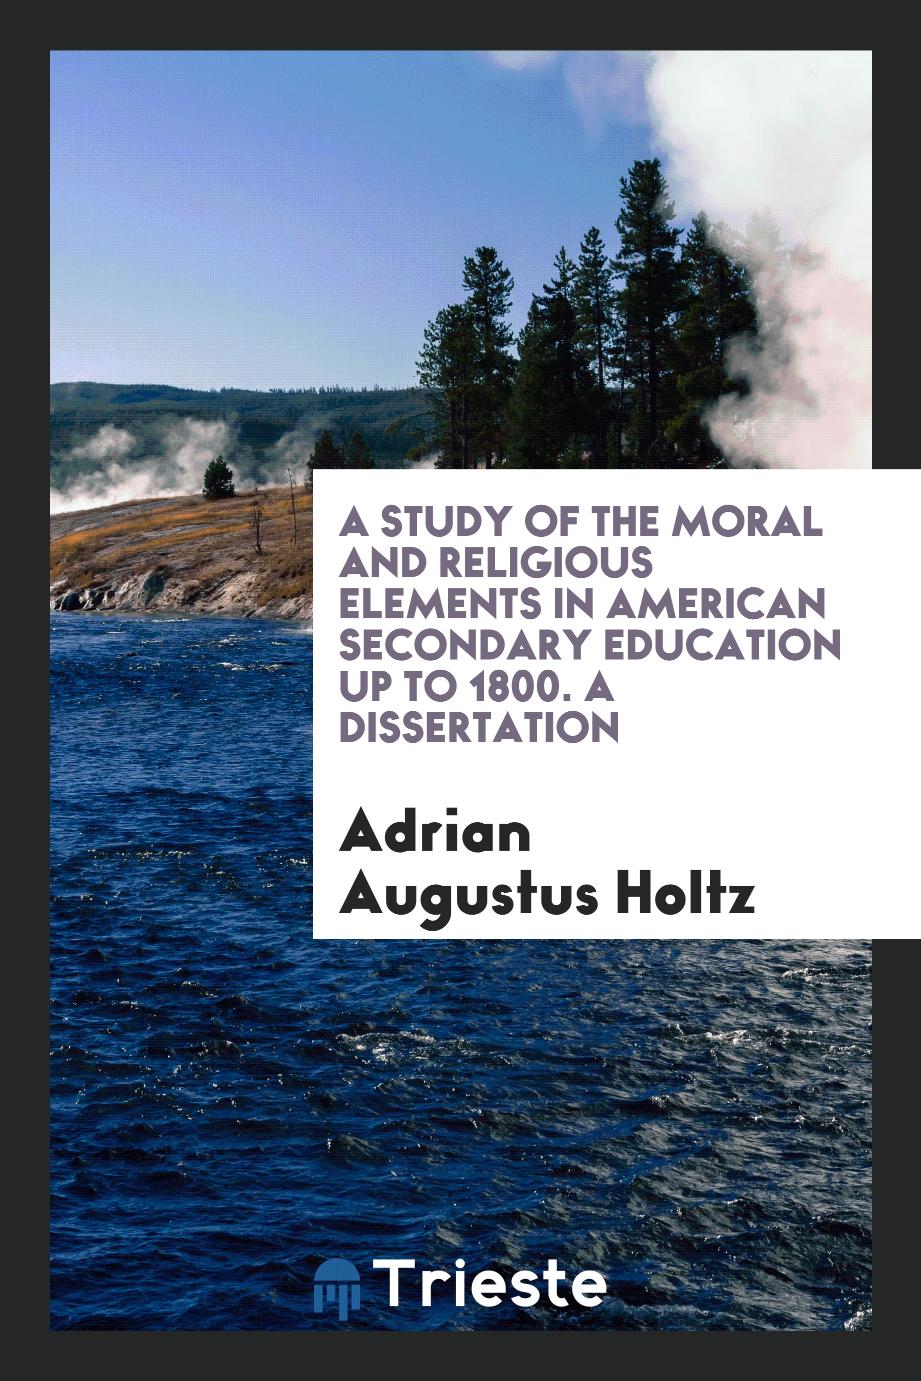 A Study of the Moral and Religious Elements in American Secondary Education up to 1800. A Dissertation